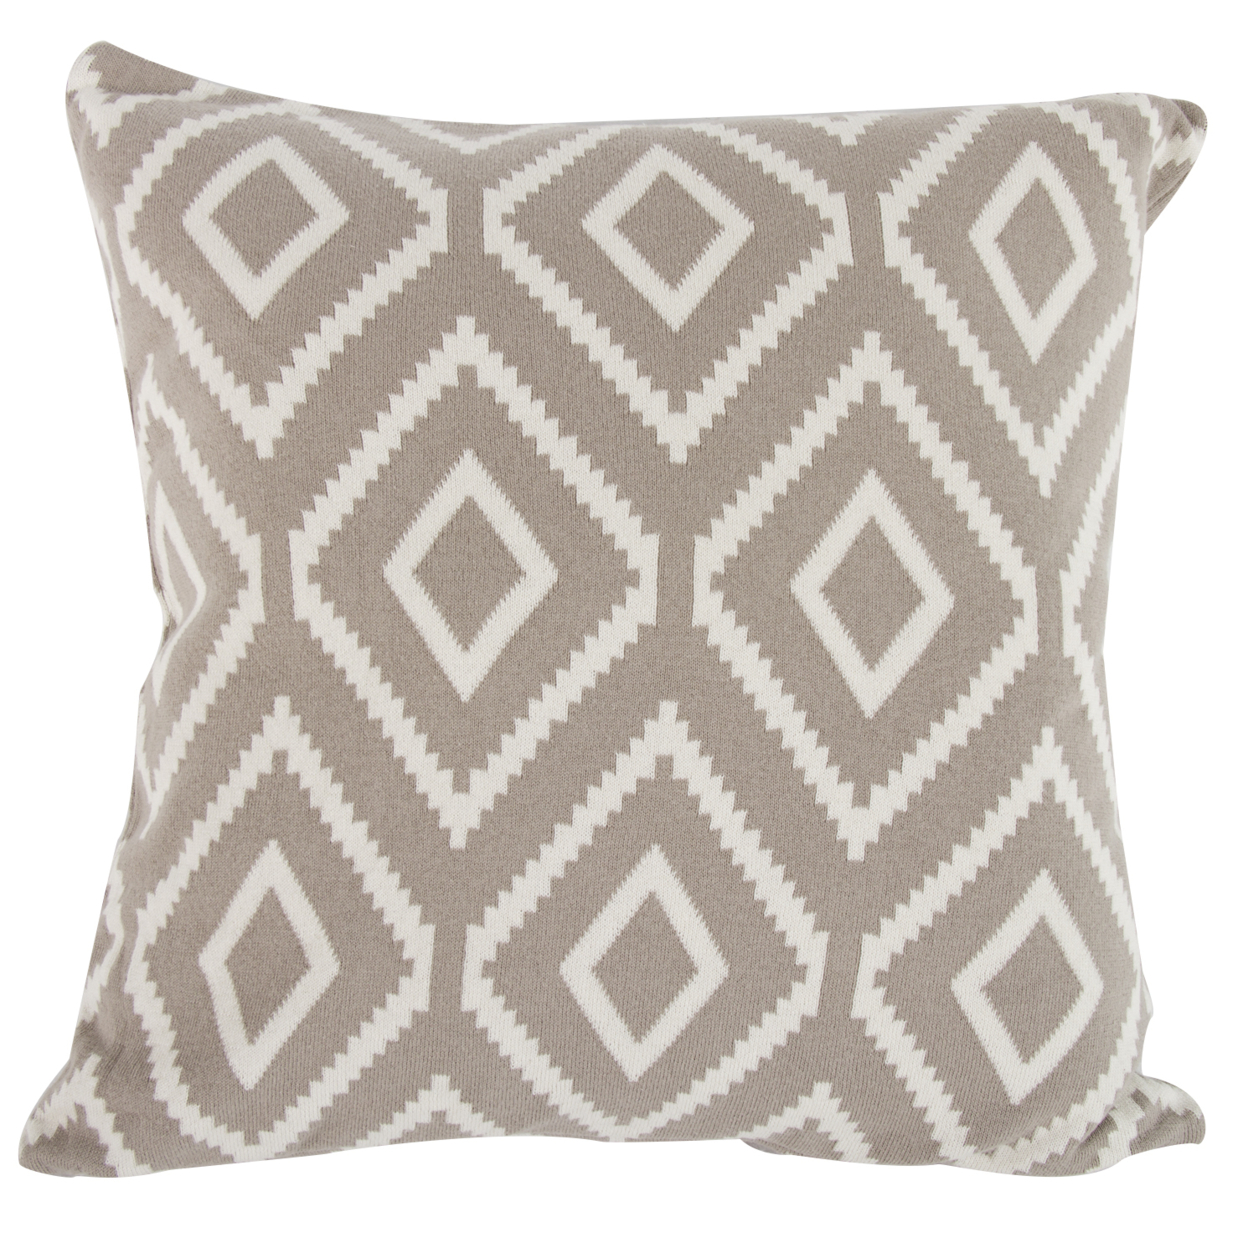 20 X 20 Inch Cashmere Pillow With Diamond Pattern, Set Of 2, Brown And White- Saltoro Sherpi